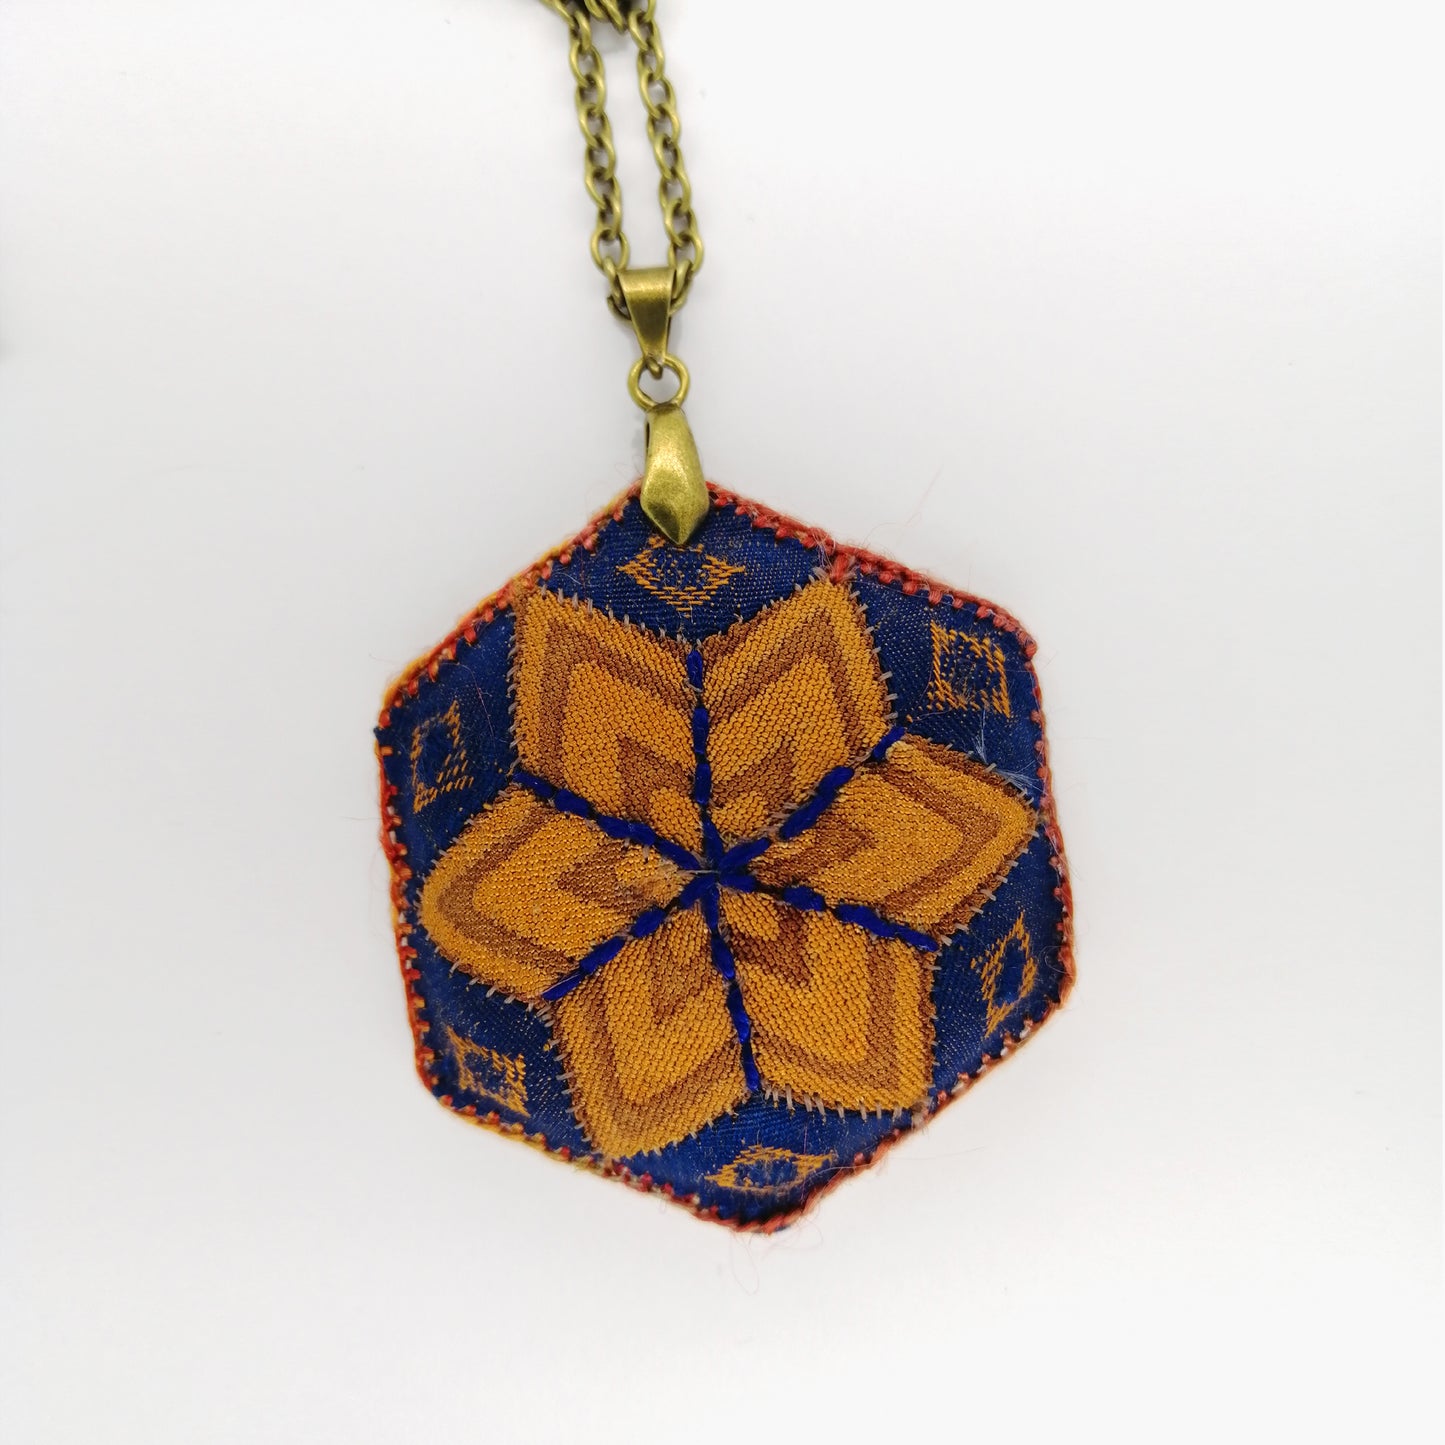 Hexie Star Necklace - Morocco